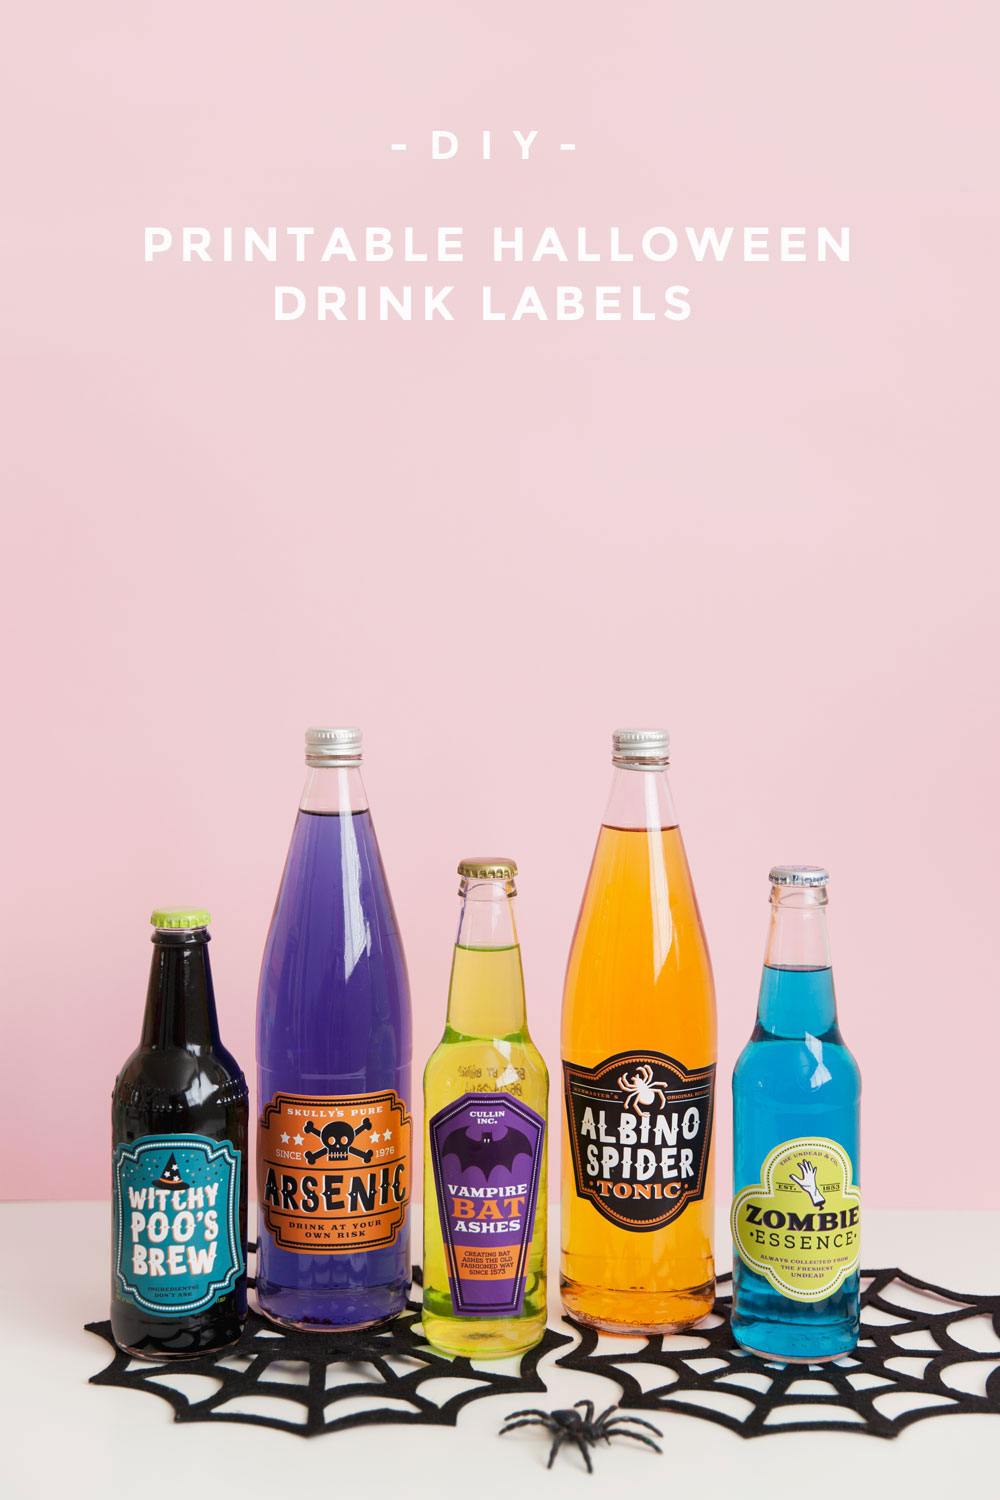 Make any halloween gathering more fun with these free printable Halloween drink labels. Stick them on any bottle and they instantly become a spooky treat.